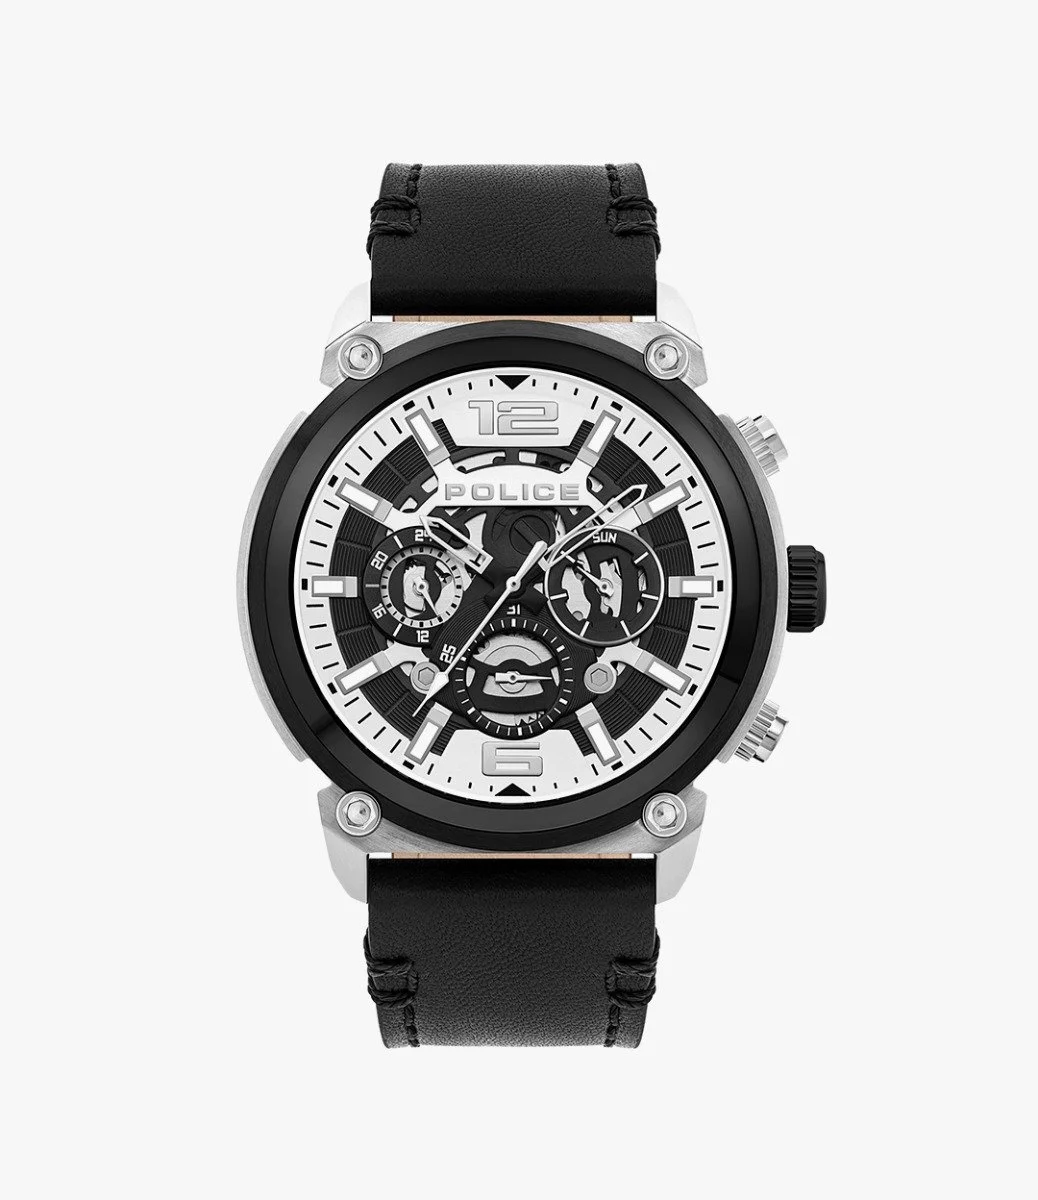 Police Armor Leather Analog Watch for Men